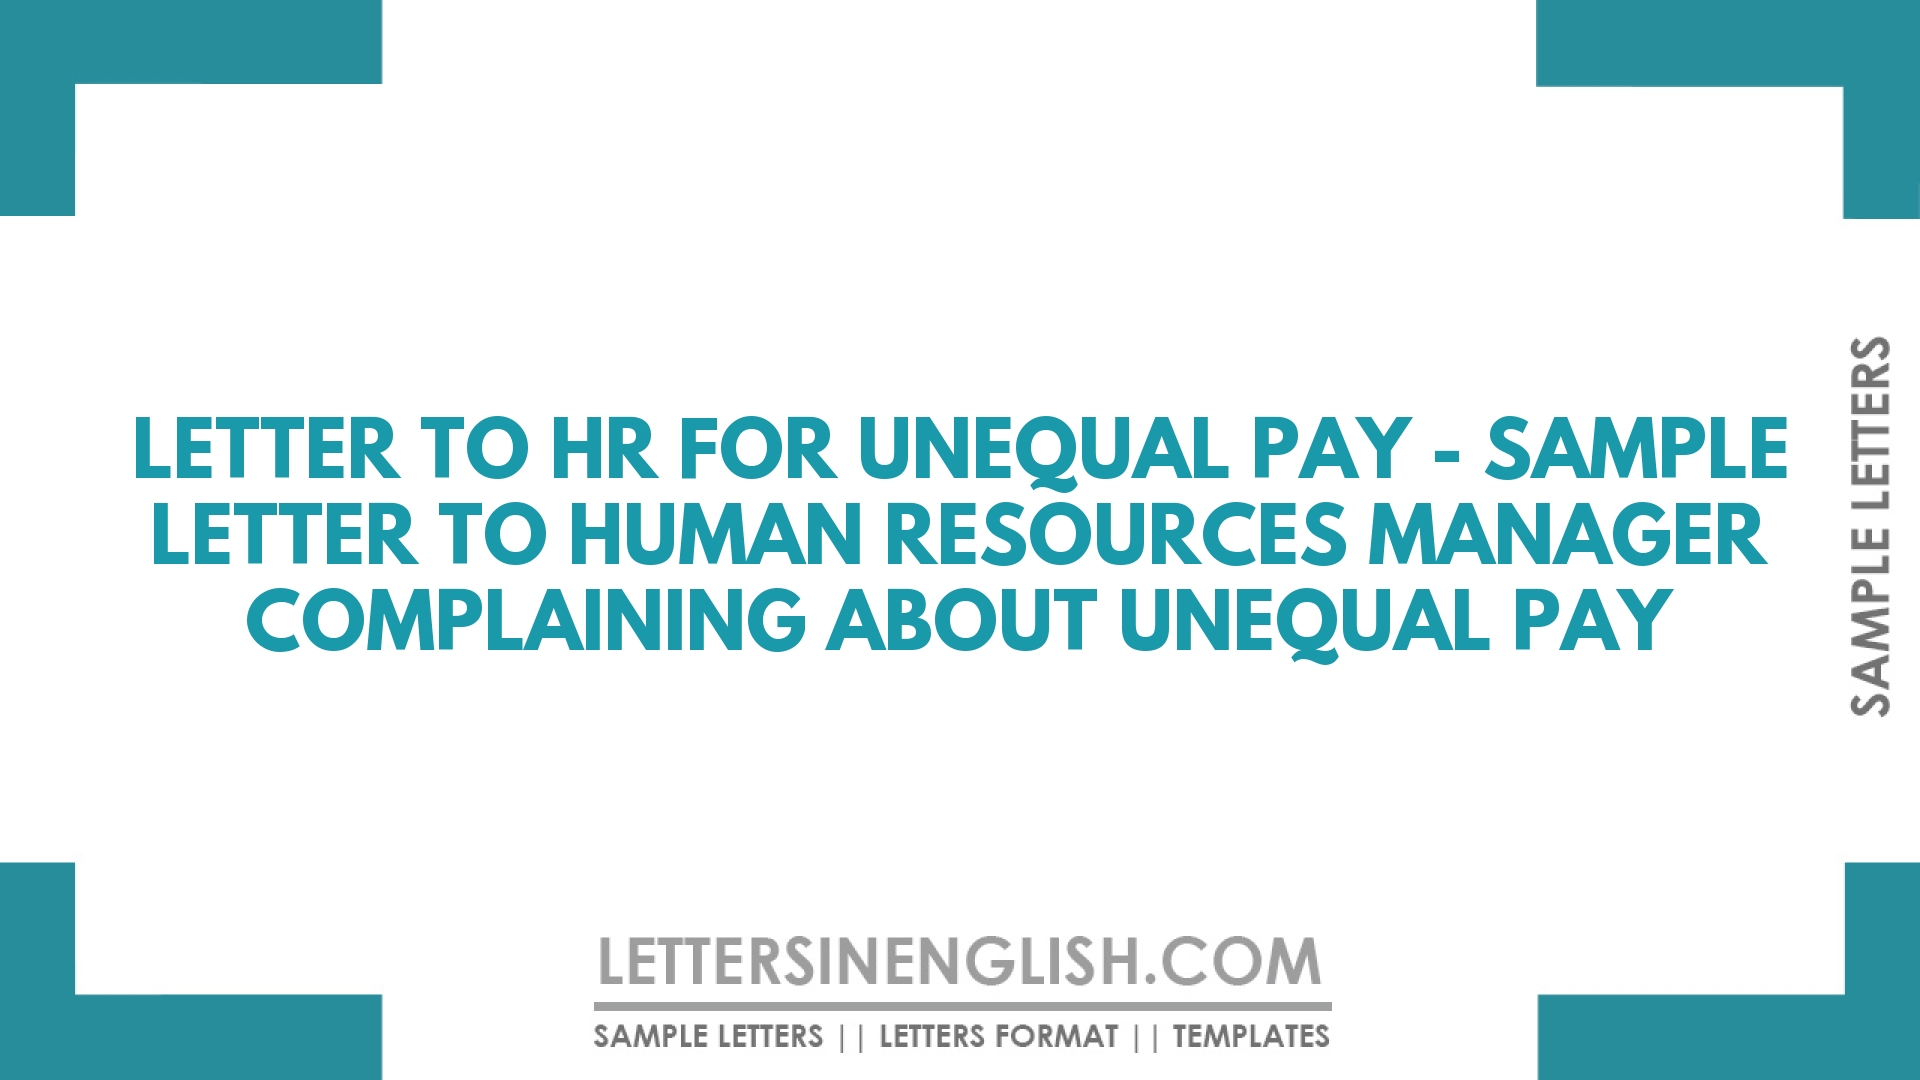 Letter to HR for Unequal Pay – Sample Letter to Human Resources Manager Complaining About Unequal Pay